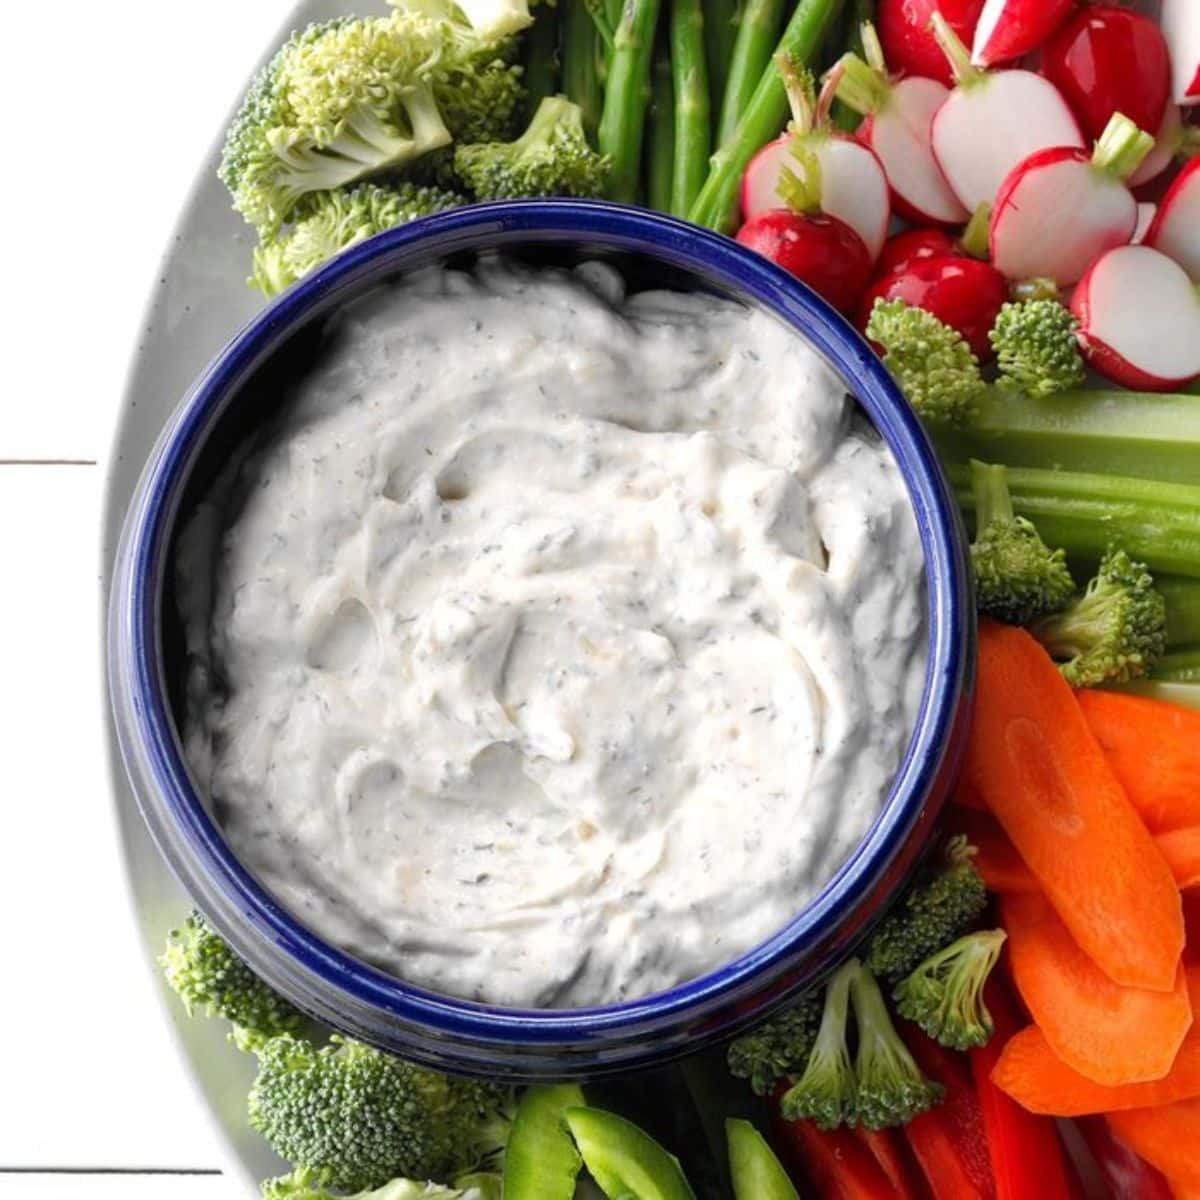 Veggie Dill Dip in a blue bowl on a tray with sliced veggies.